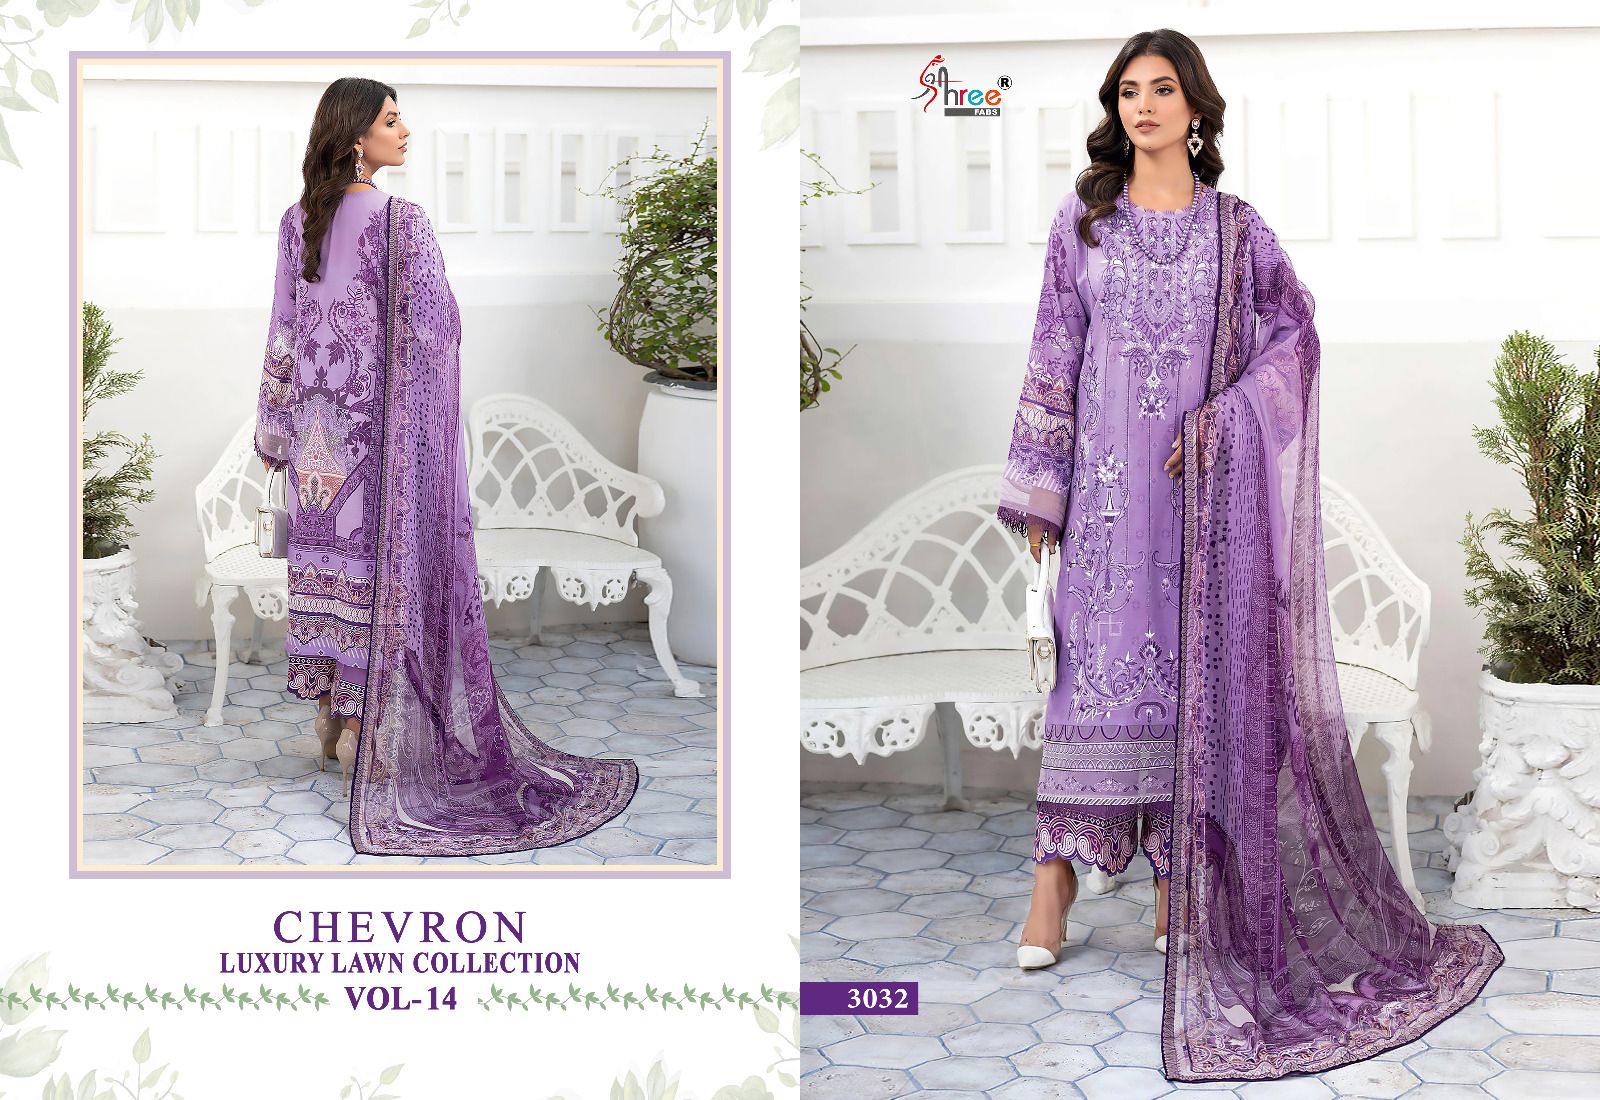 Shree Chevron Luxury Lawn Collection Vol 14 collection 4